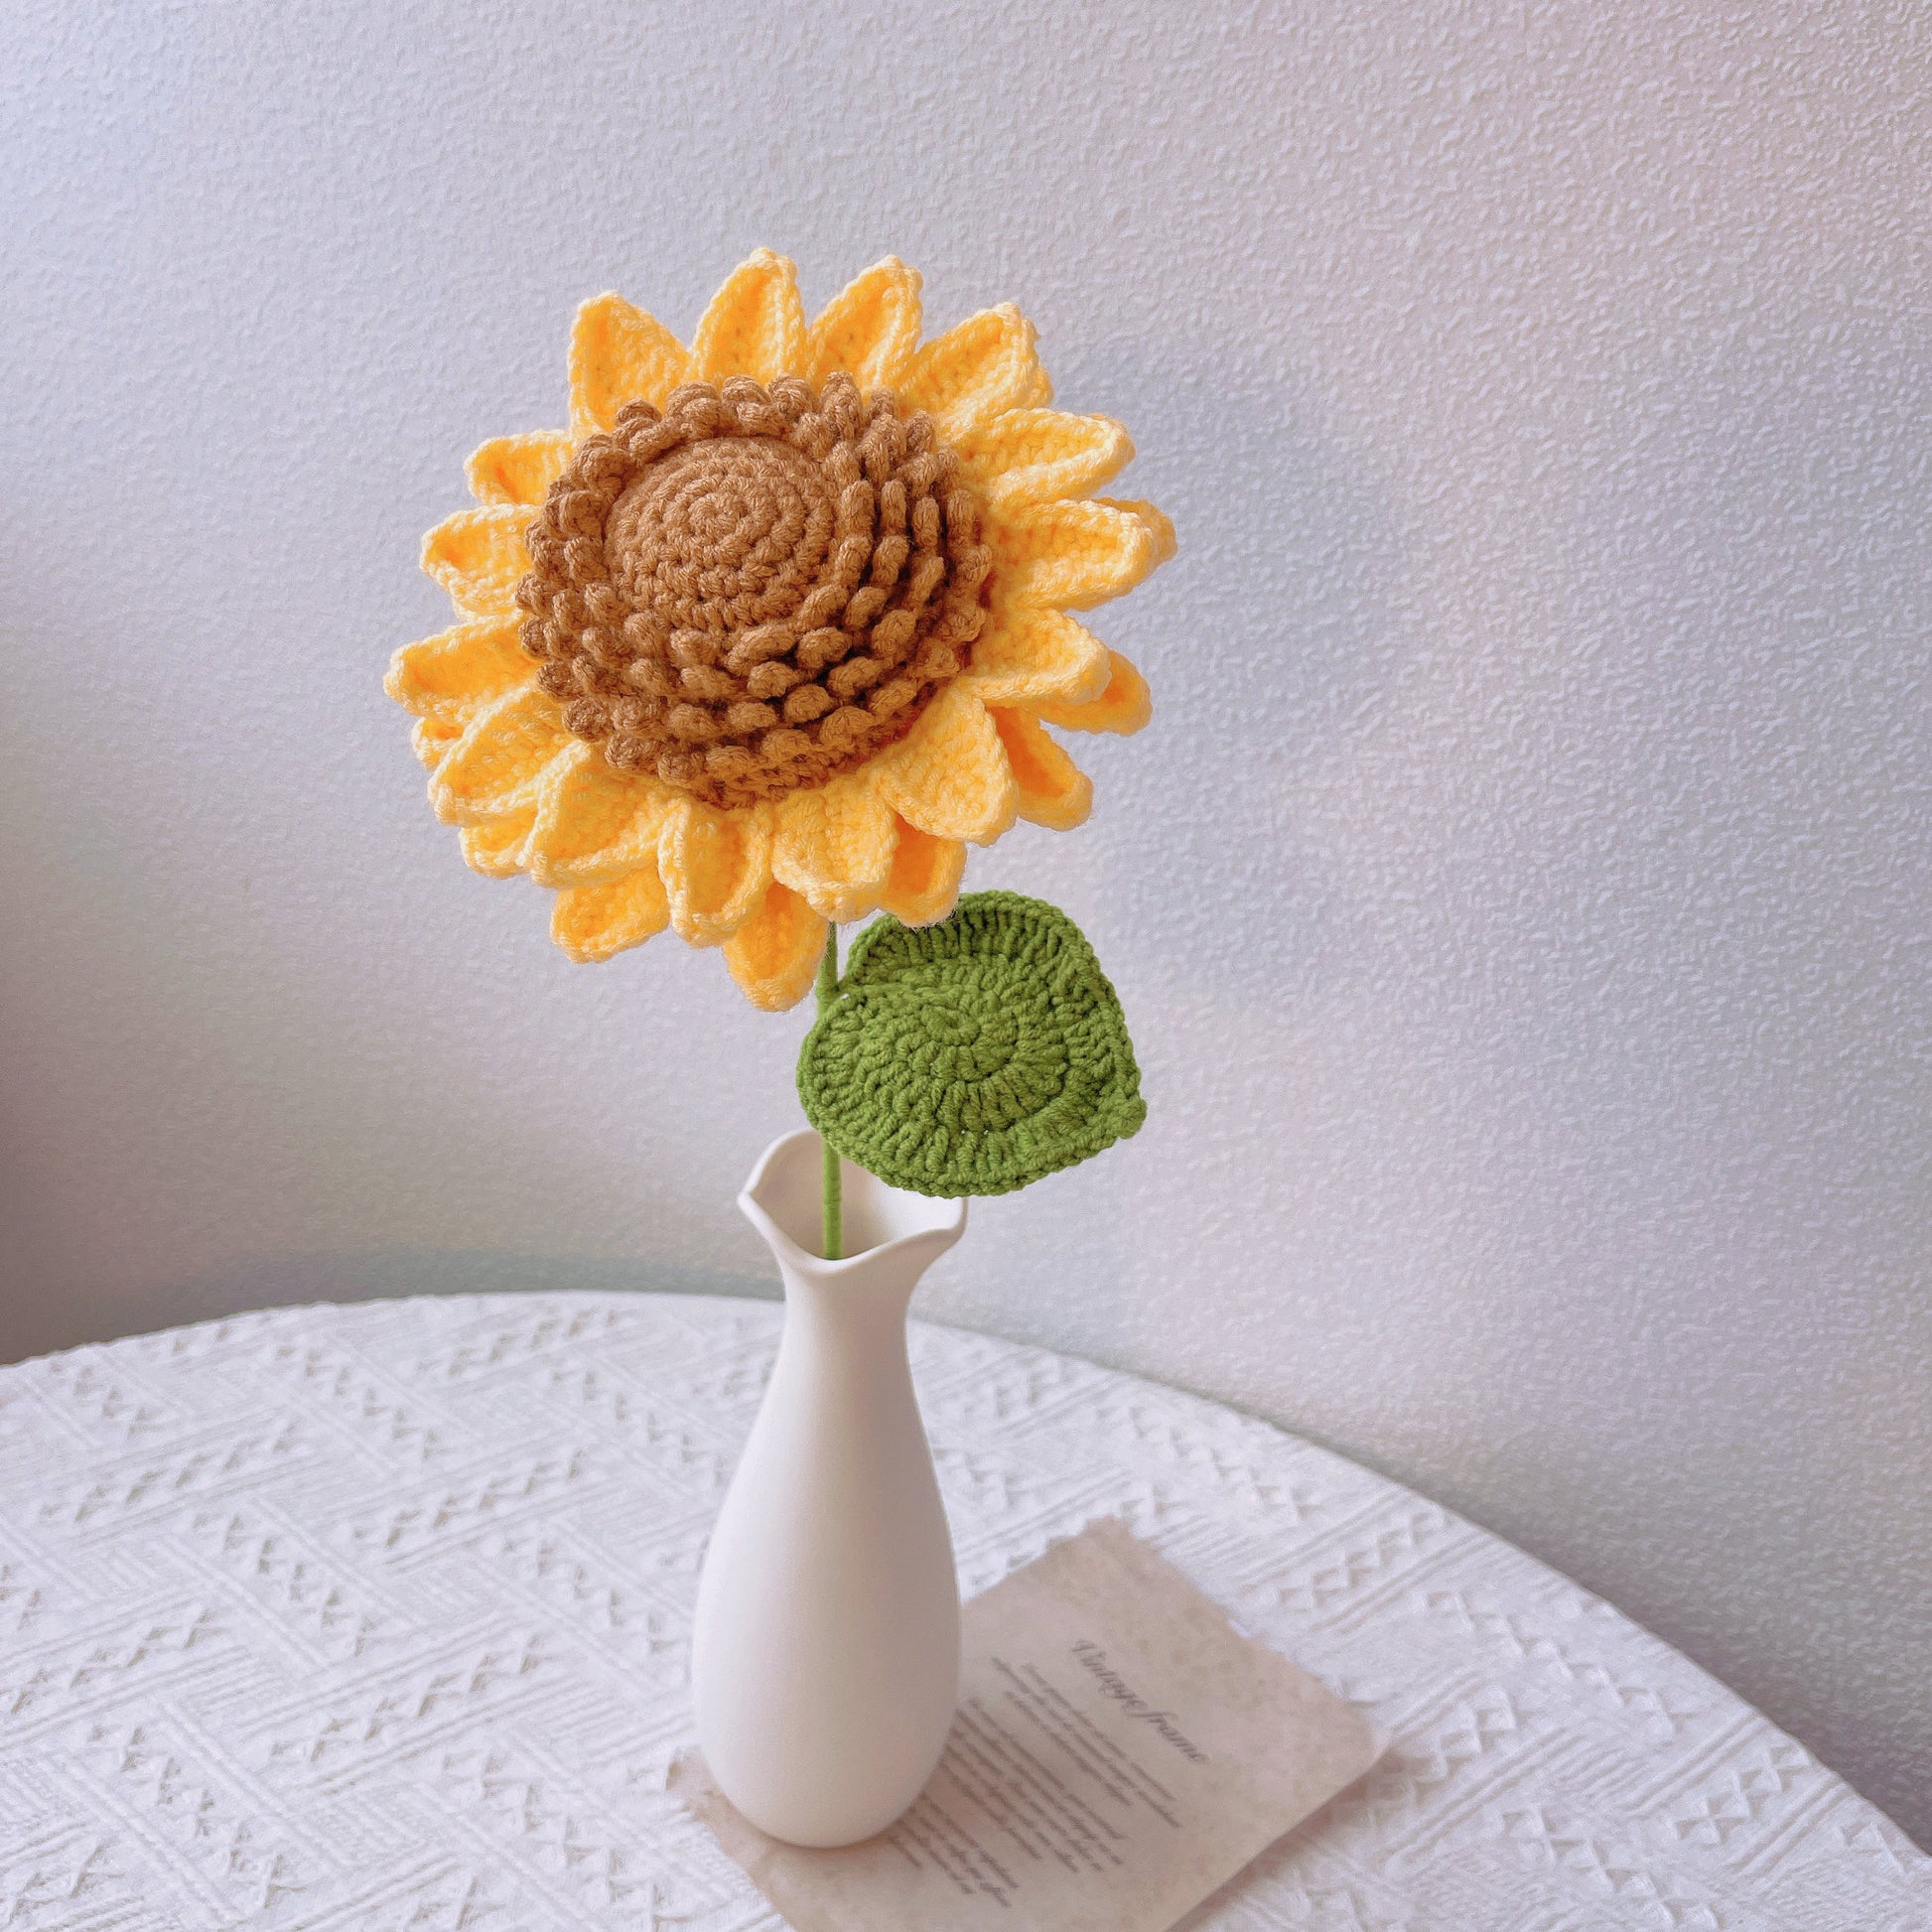 Beautifully Crafted Handmade Crochet Sunflowers with Lush Green Leaf Mini Bouquet - Perfect for Wedding, Birthday, Anniversaries and Gifting